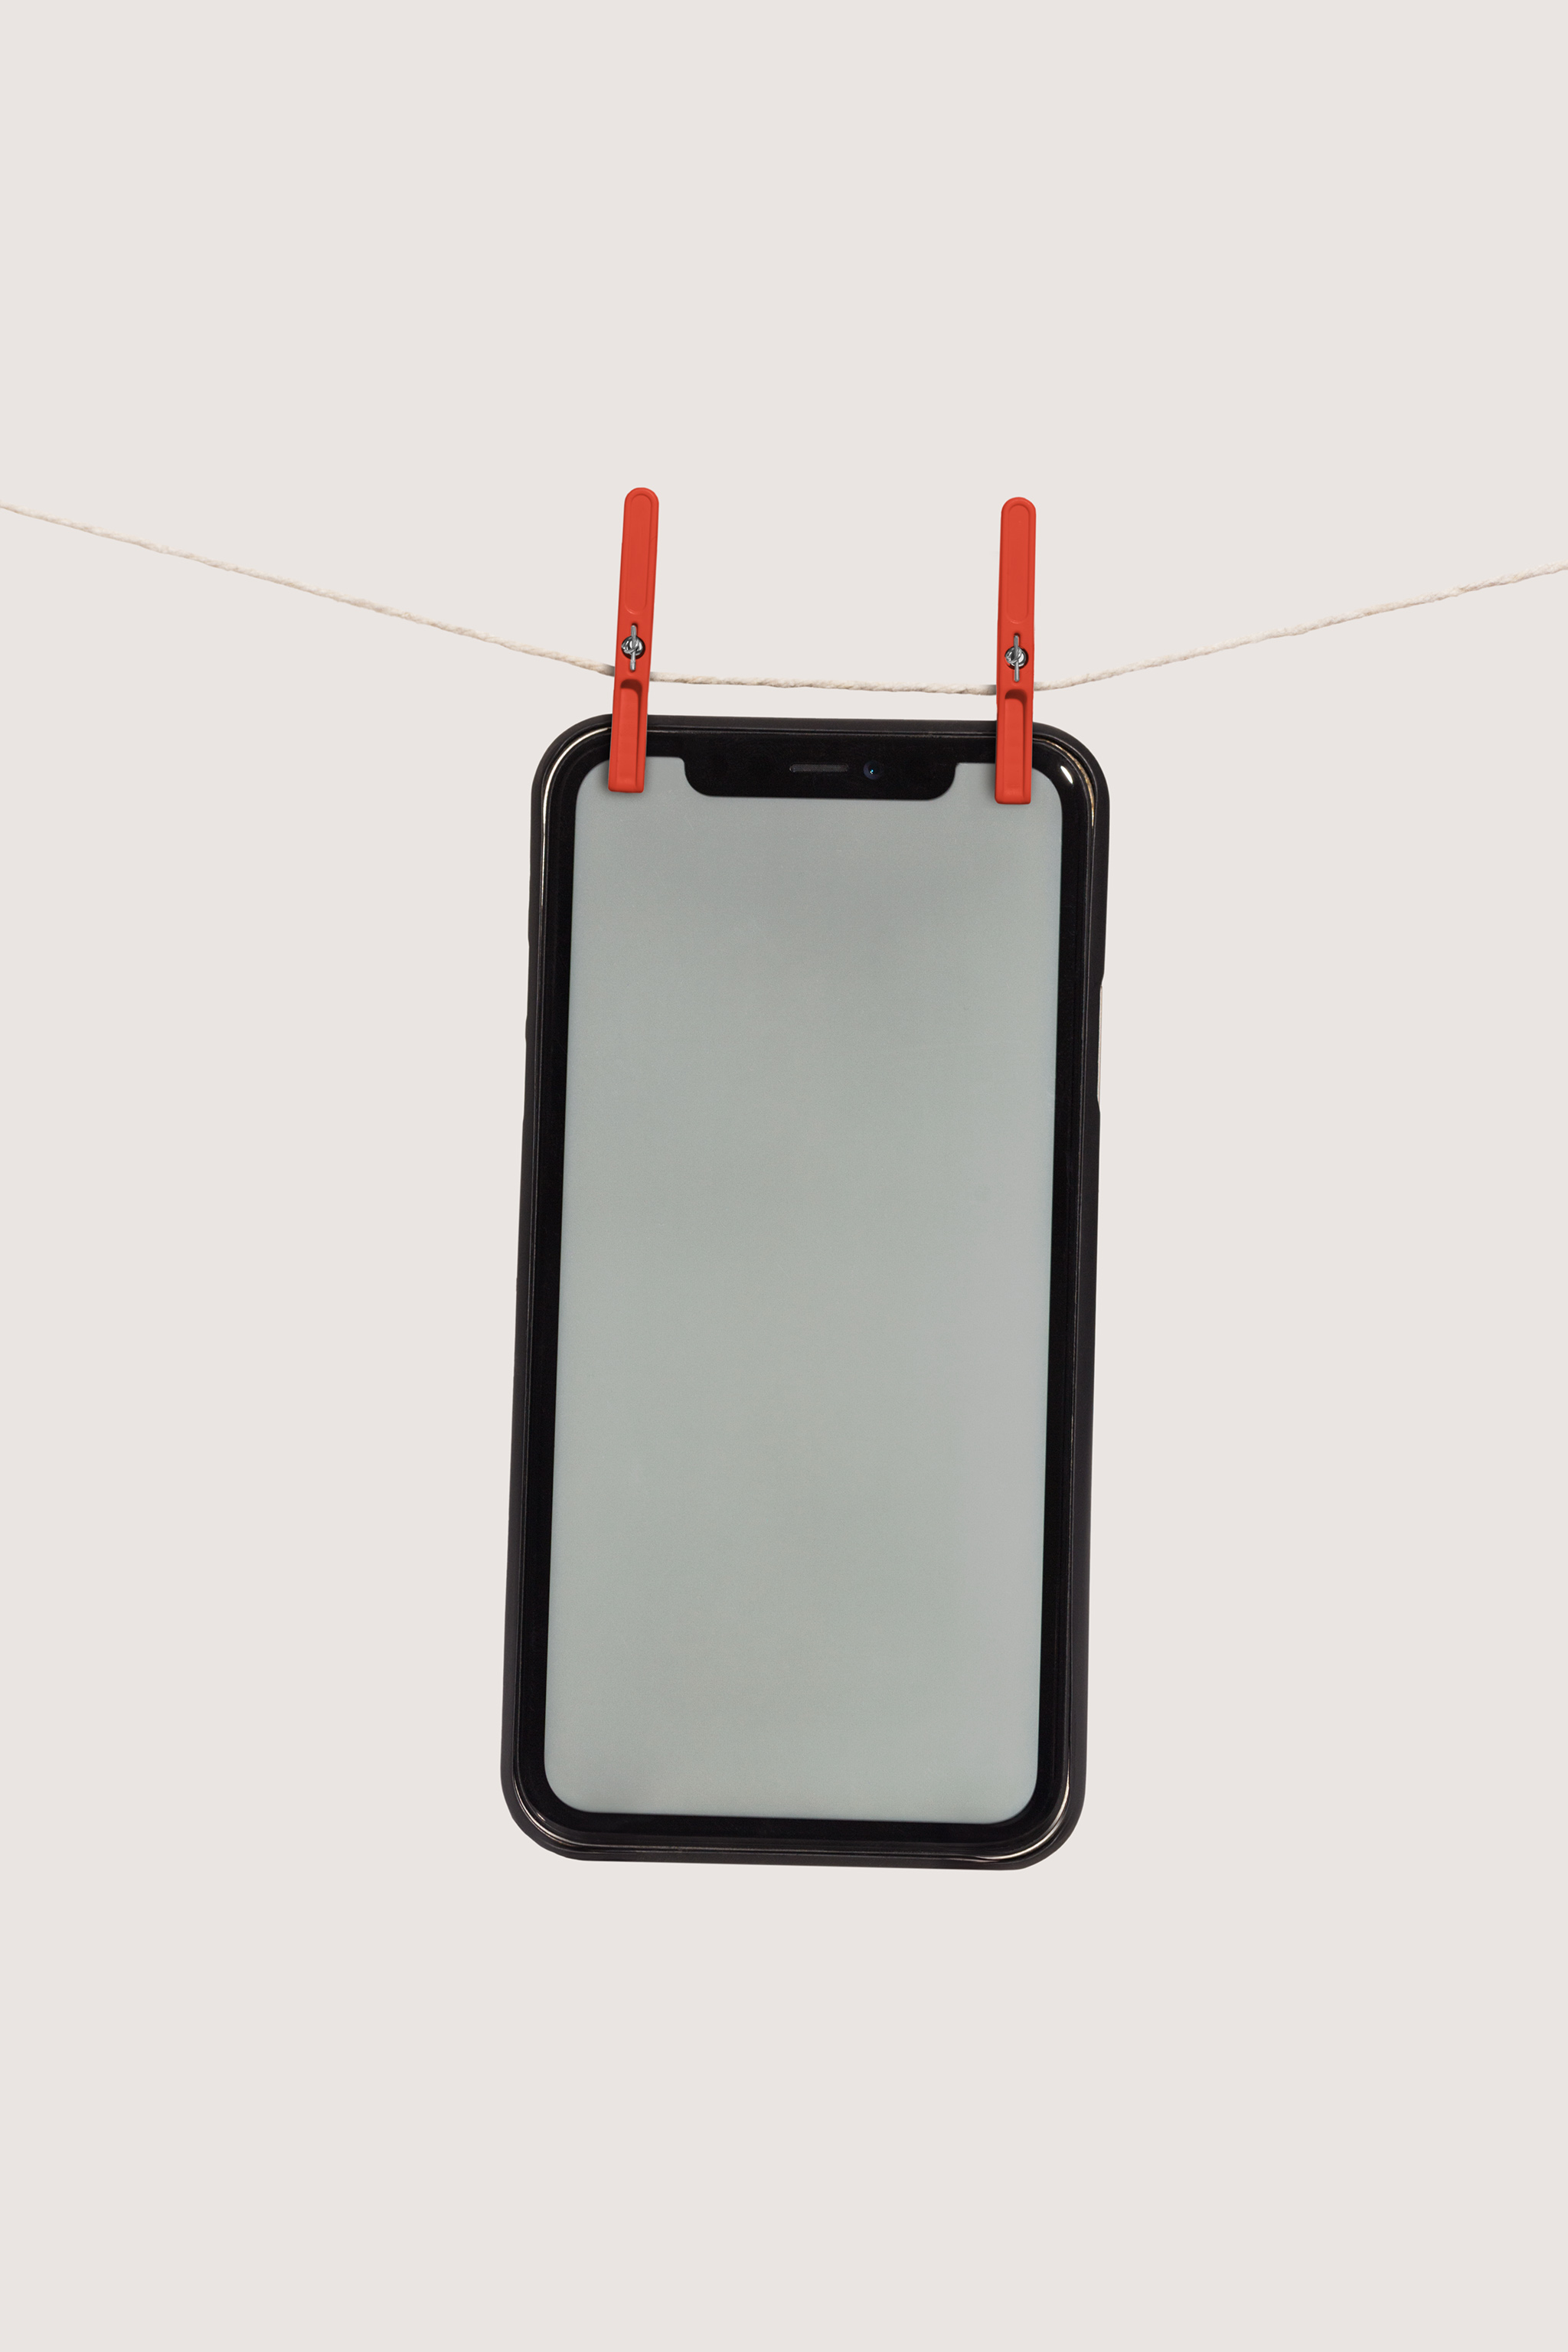 Large floating iPhone device mockup hung with clothespins in the air against a cloudy sky background, empty mockup.